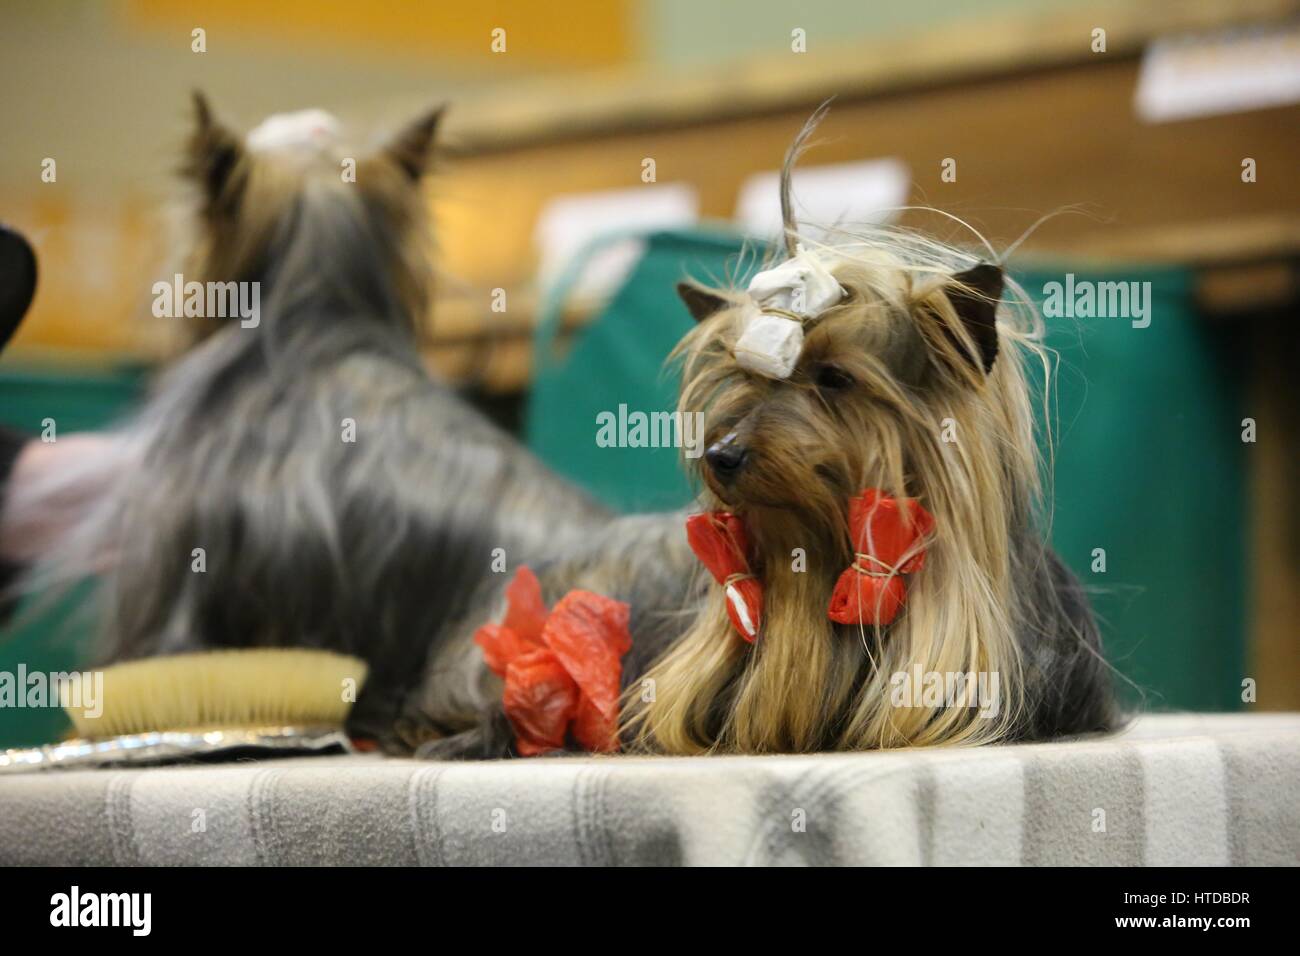 Crufts, Birmingham, UK. 10th March 2017. The world's largest dog show, Crufts, takes place in Birmingham with dogs of all shapes & sizes. ©Jon Freeman/Alamy Live News Stock Photo